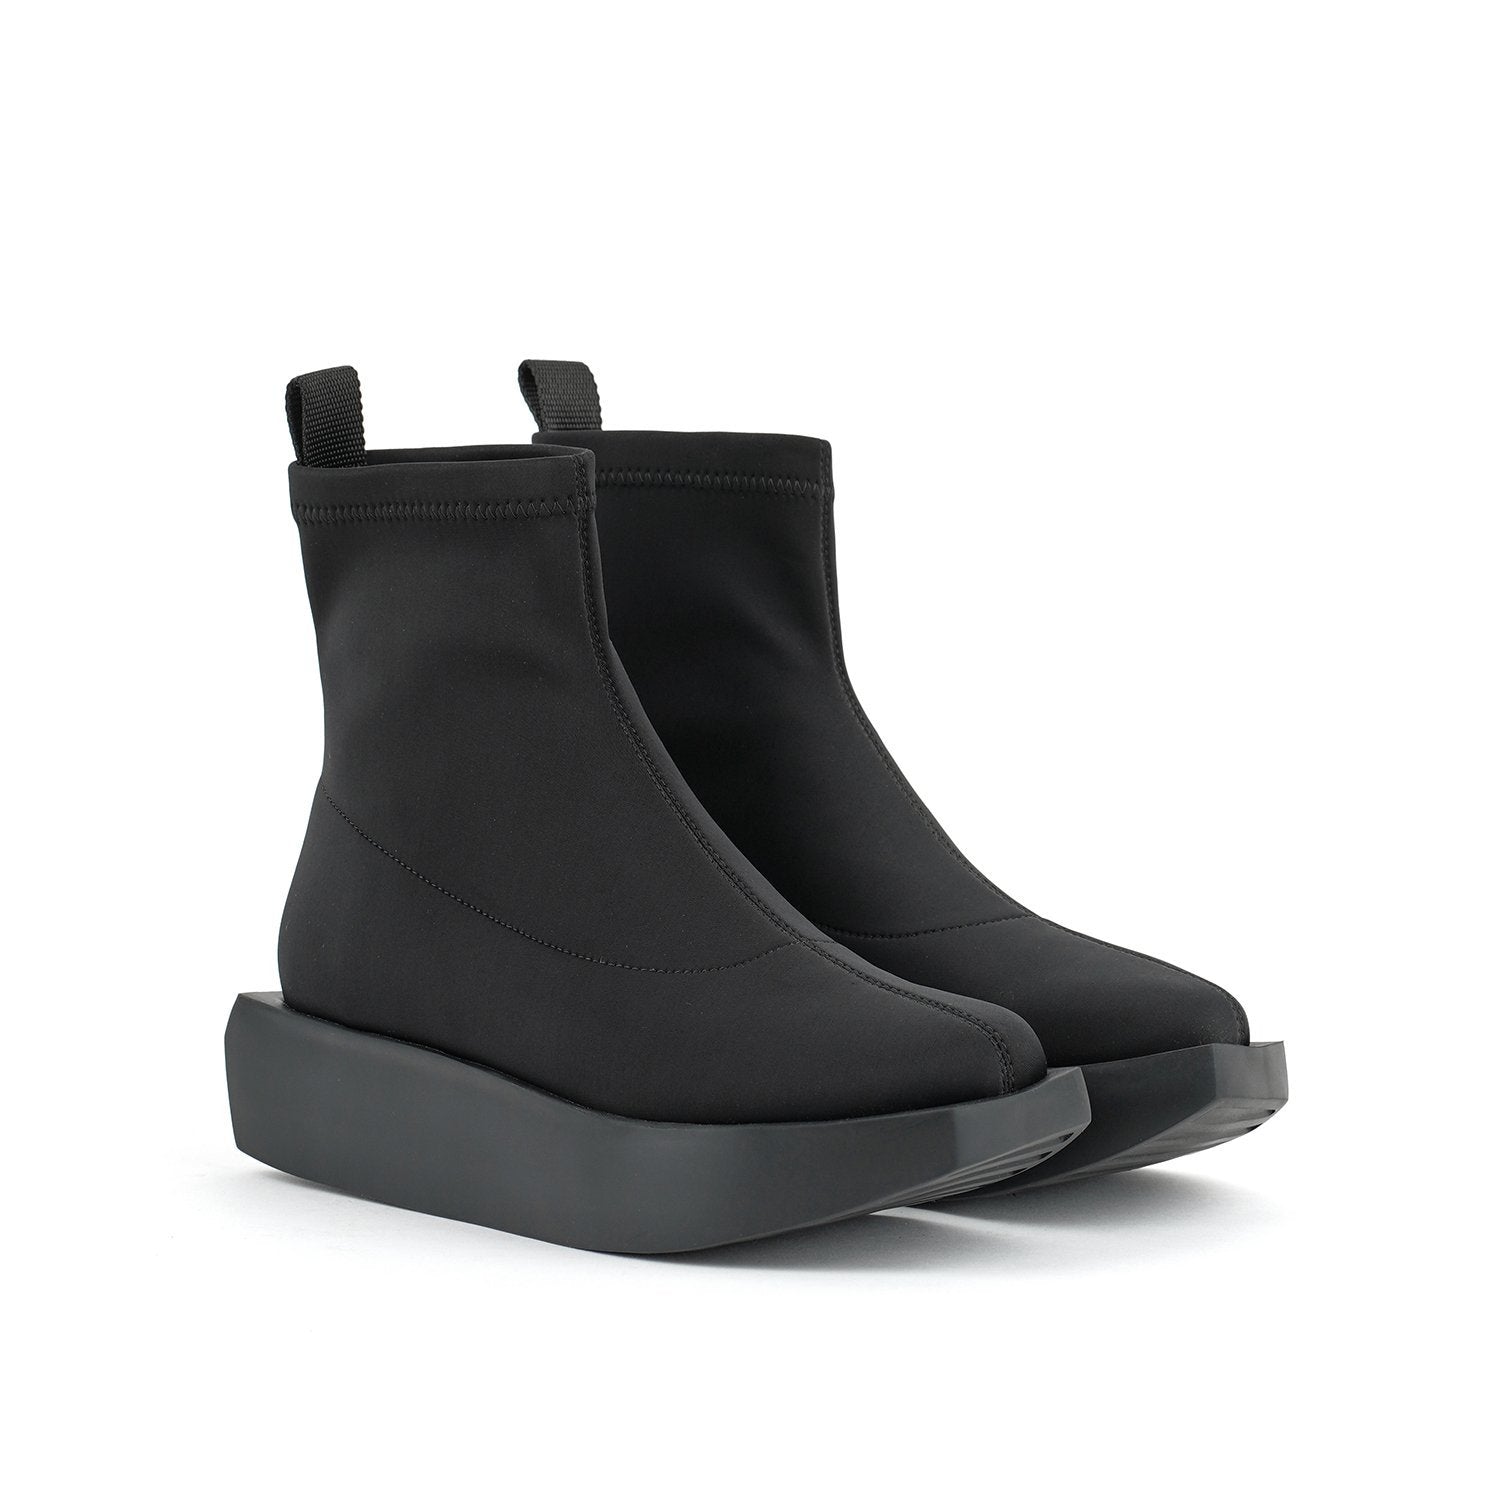 Outer front side view of a pair of the united nude wa bootie lo. This bootie is black and minimal. It has a sock-like appearance with a black platform sole.